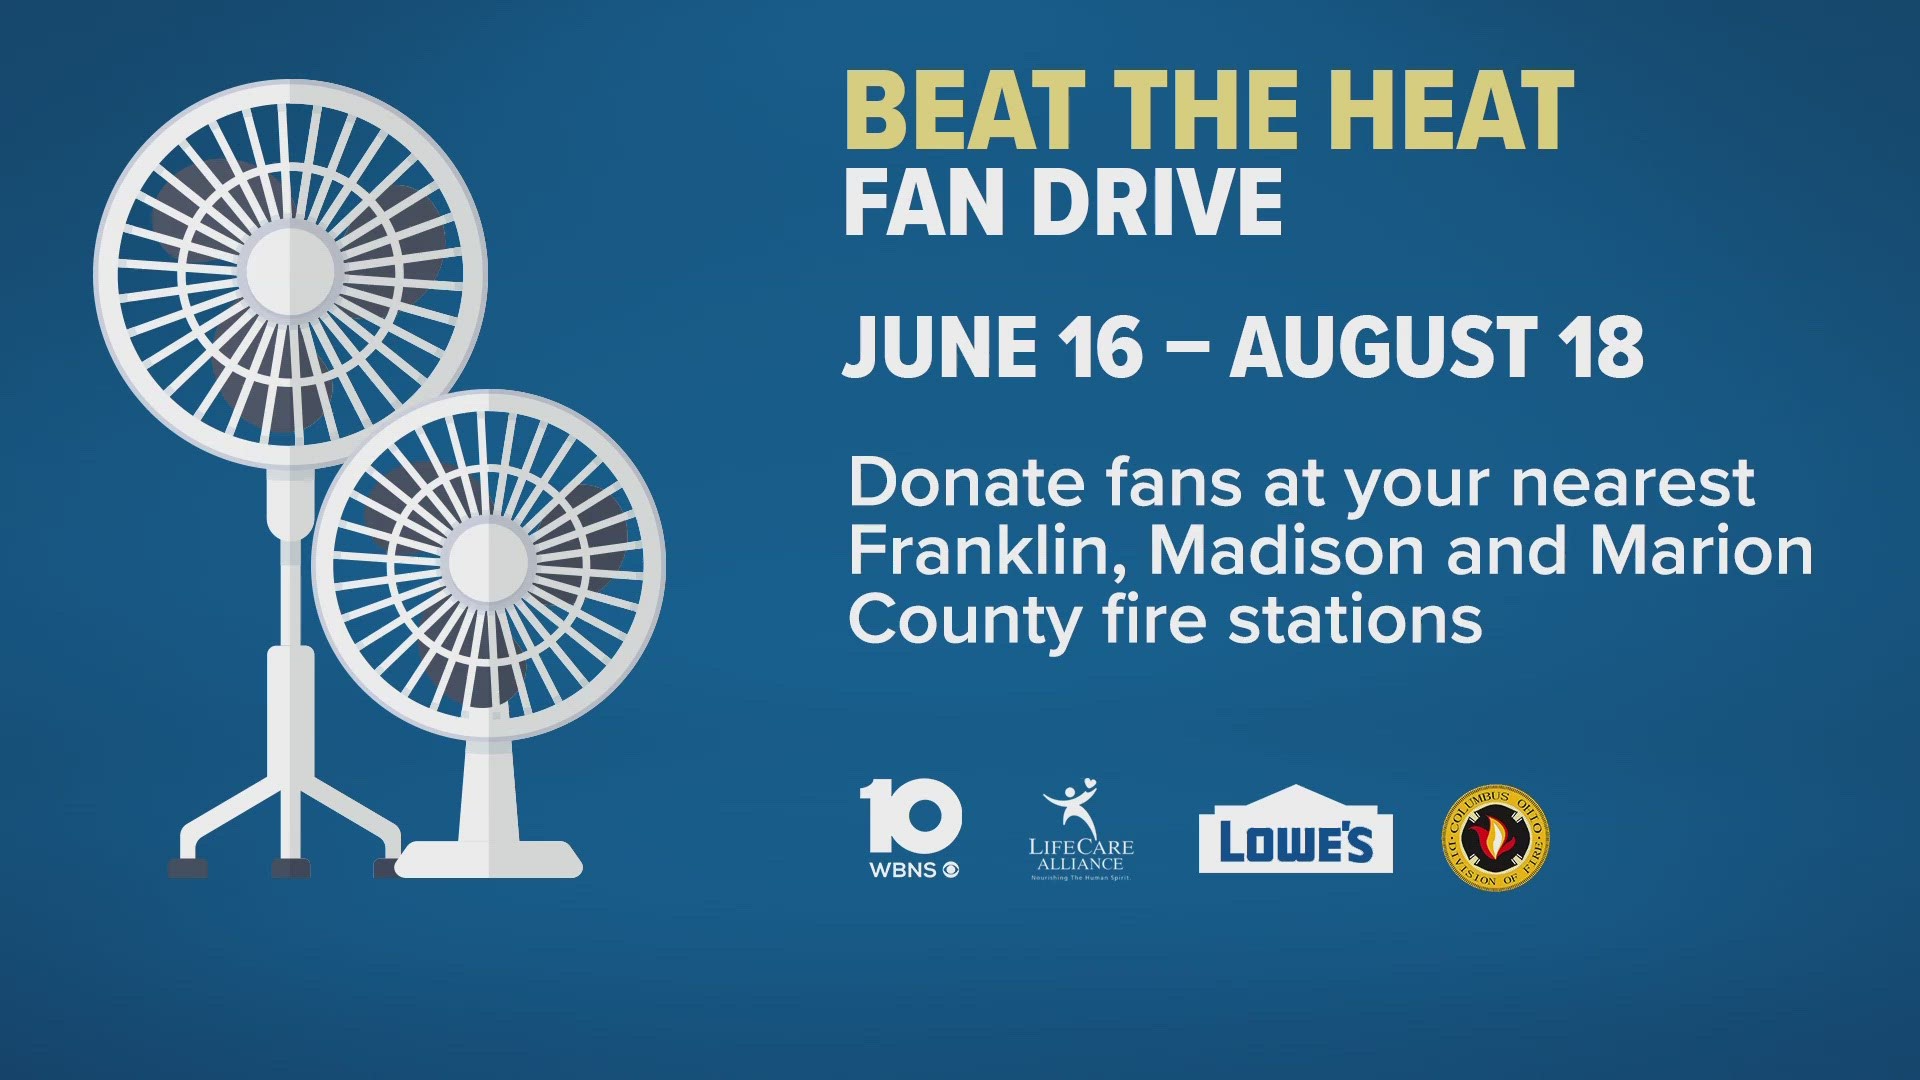 From June 16 to August 16, 10TV is teaming up with LifeCare Alliance to collect fans at several different locations in the city.